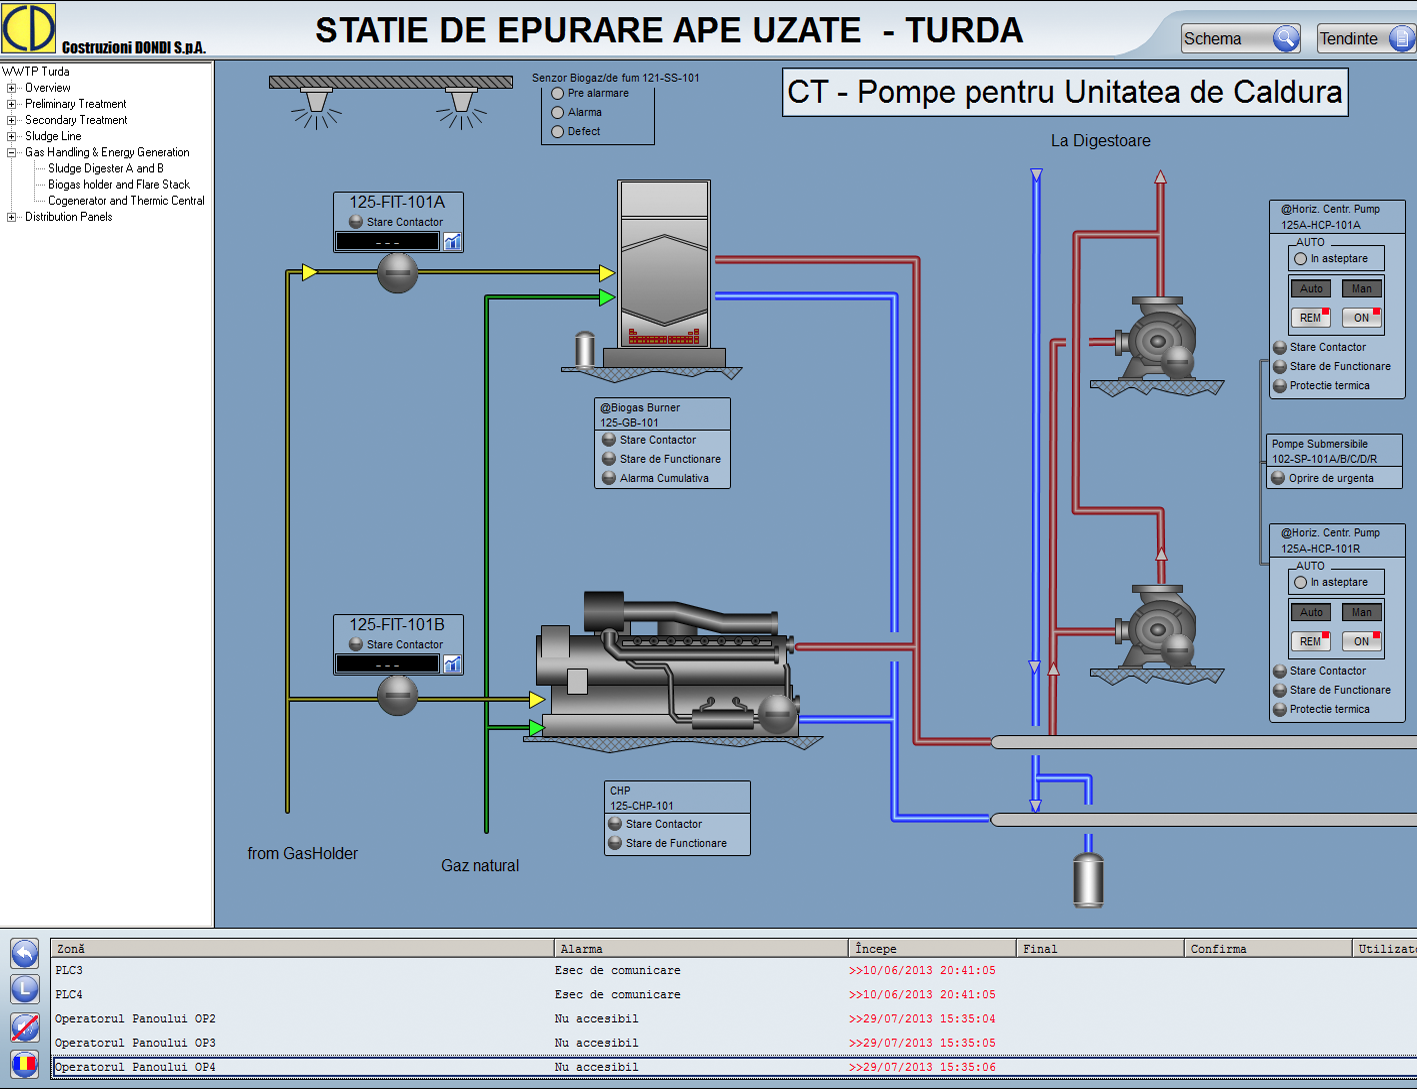 COMPANIA DE APĂ ARIEȘ S.A. – SCADA system for the monitoring and control of the water supply network dispatching